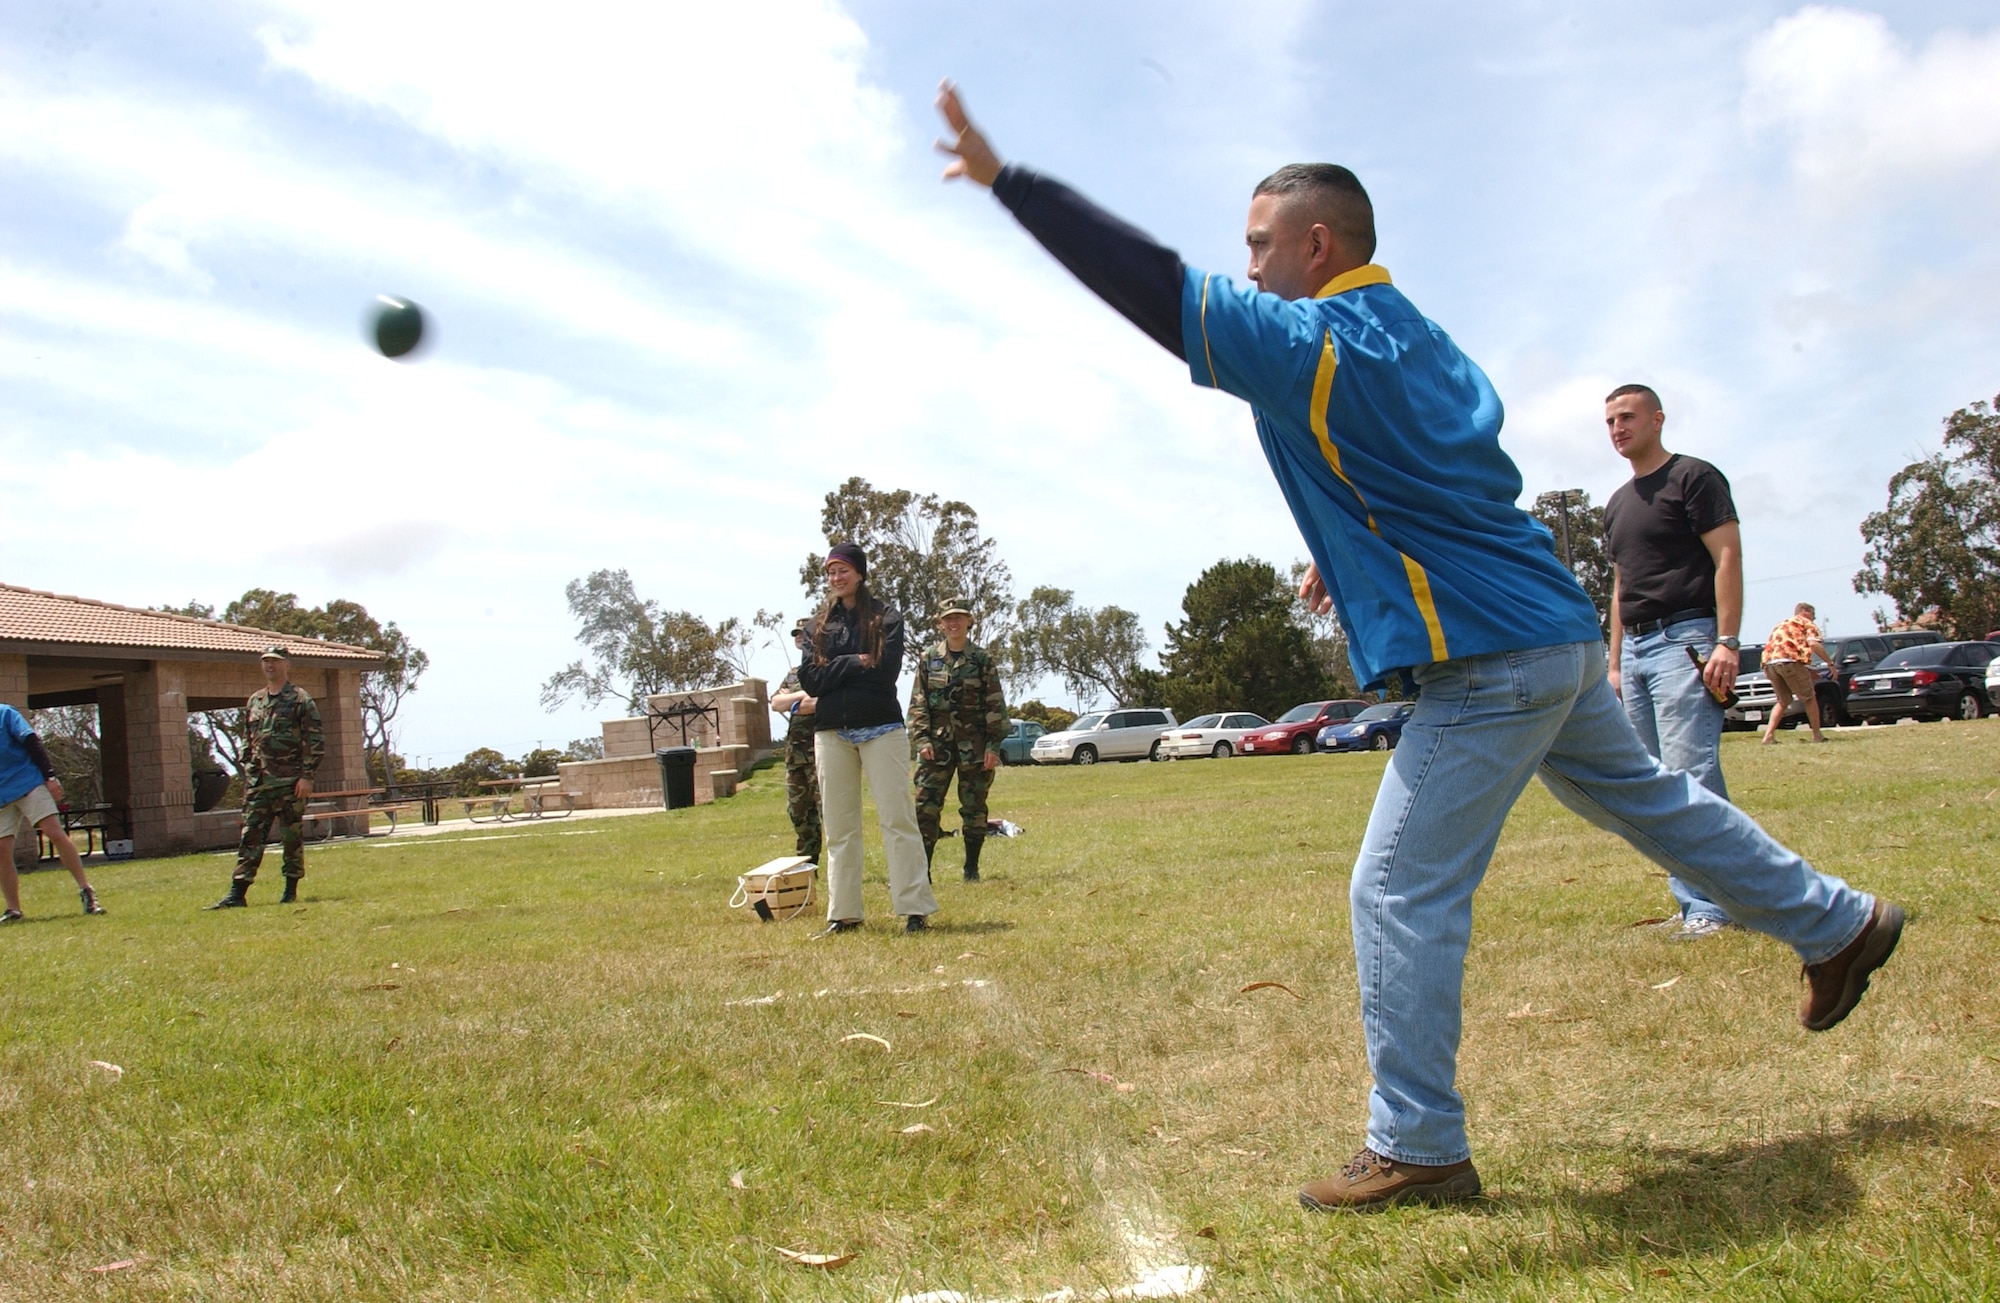 Lt. Col. Lance "The Judge" Kawane, 392nd Training Squadron Operations Officer, bowls for his team Thor in the first round of the Combat Bocce Ball Tournament here May 4. The event was put on as one of the 381st TRG quarterly events to ensure morale stays high. (U.S. Air Force Photo by Nichelle Griffiths)
